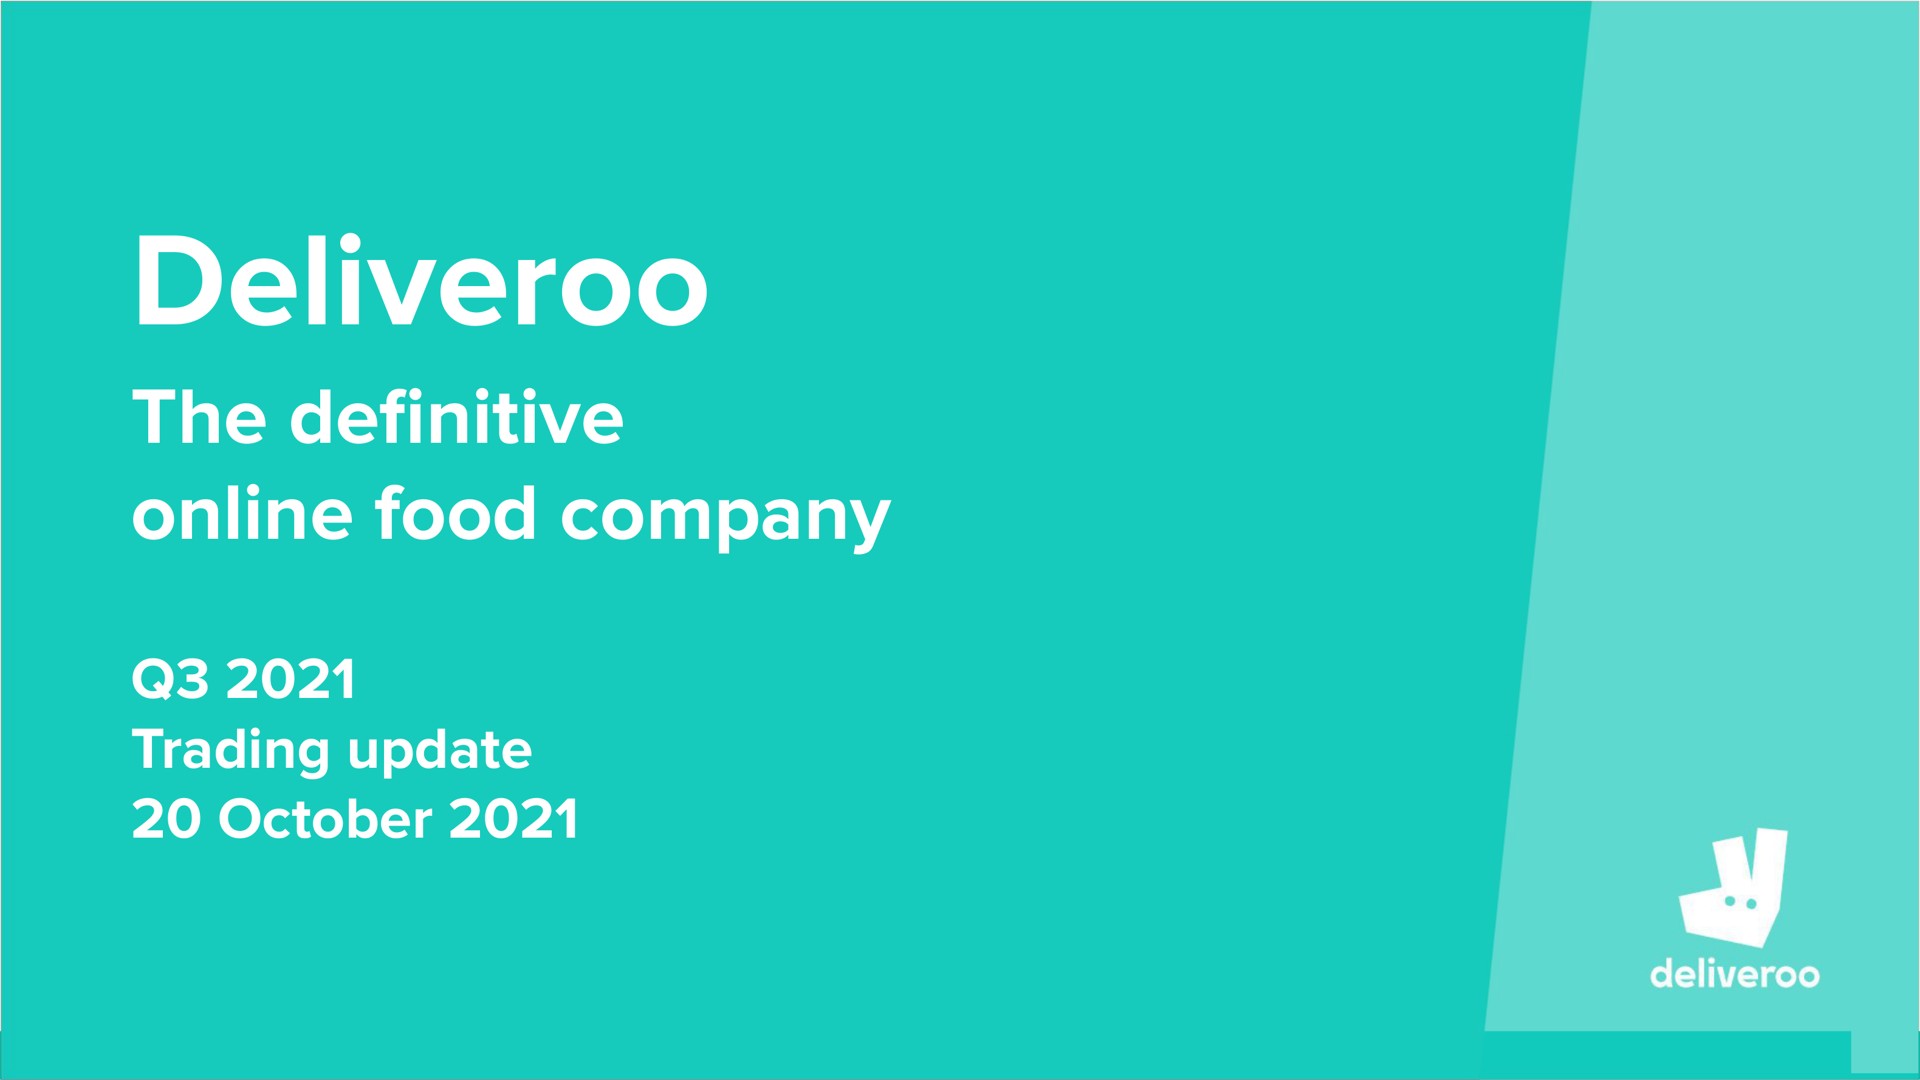 the food company trading update definitive | Deliveroo